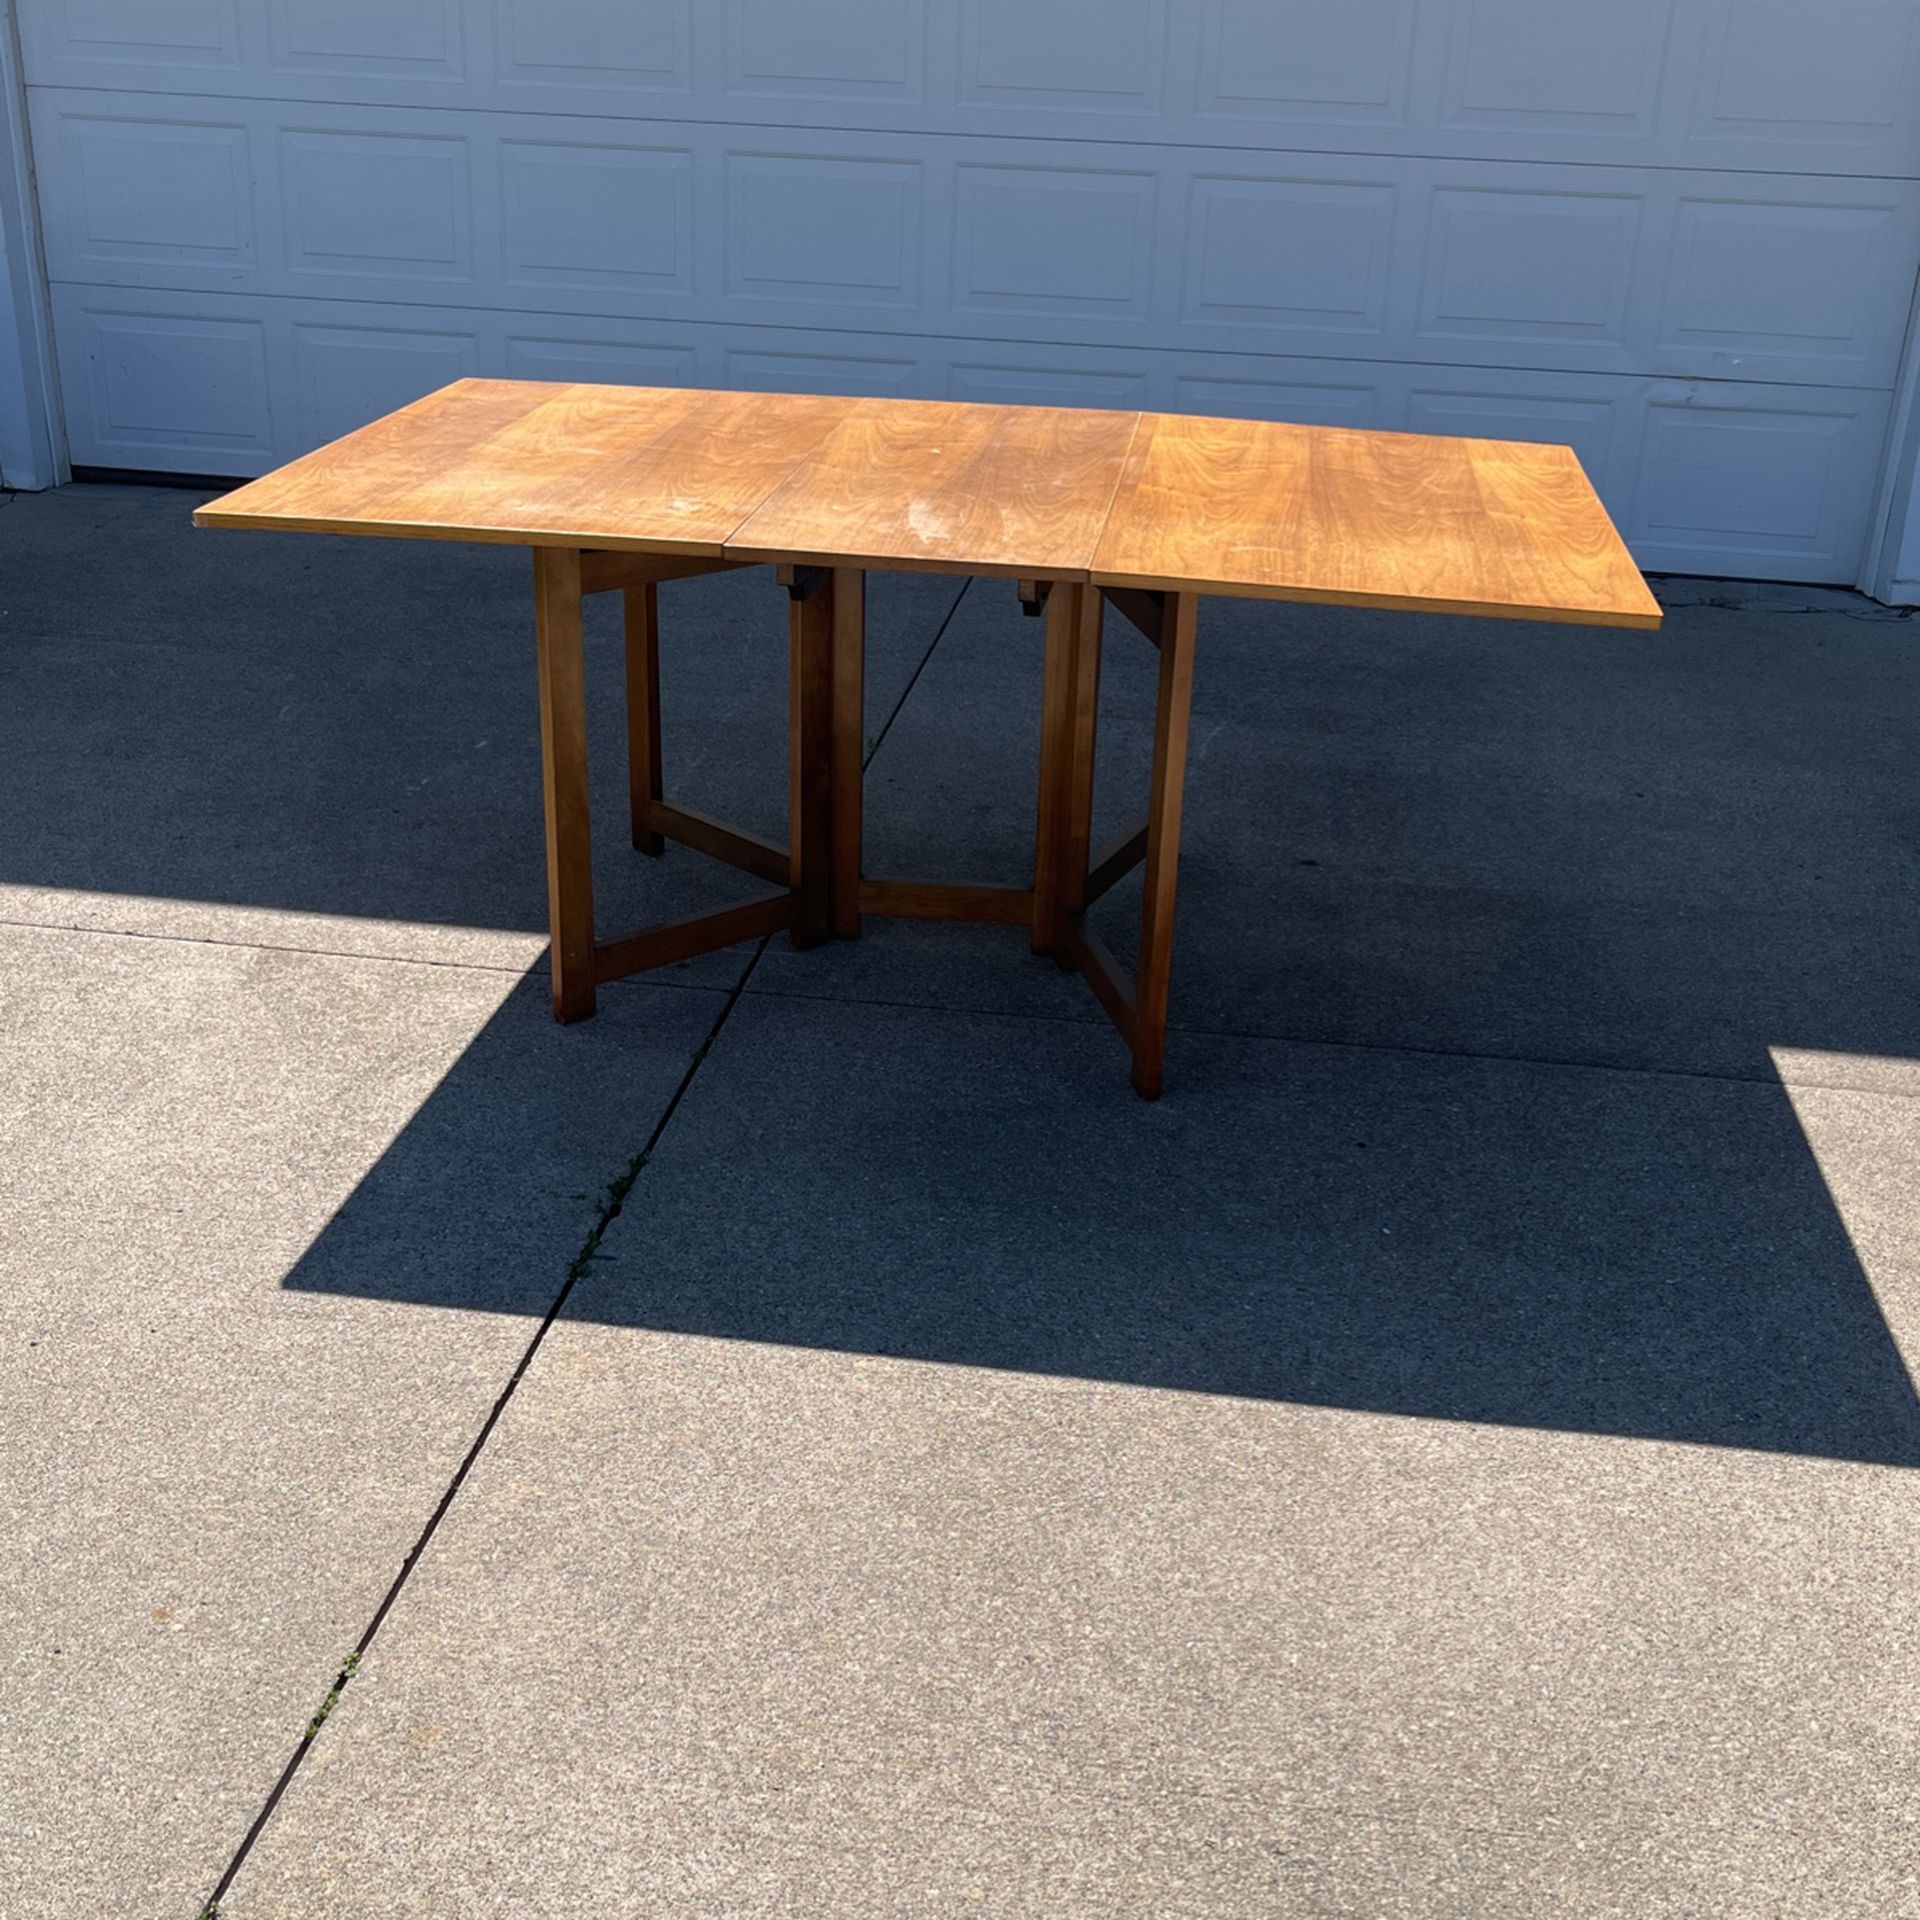 Dining Room Table That Expands From 18” Wide To 45” To 72”. It Is 42” Deep And 29 1/2” Tall